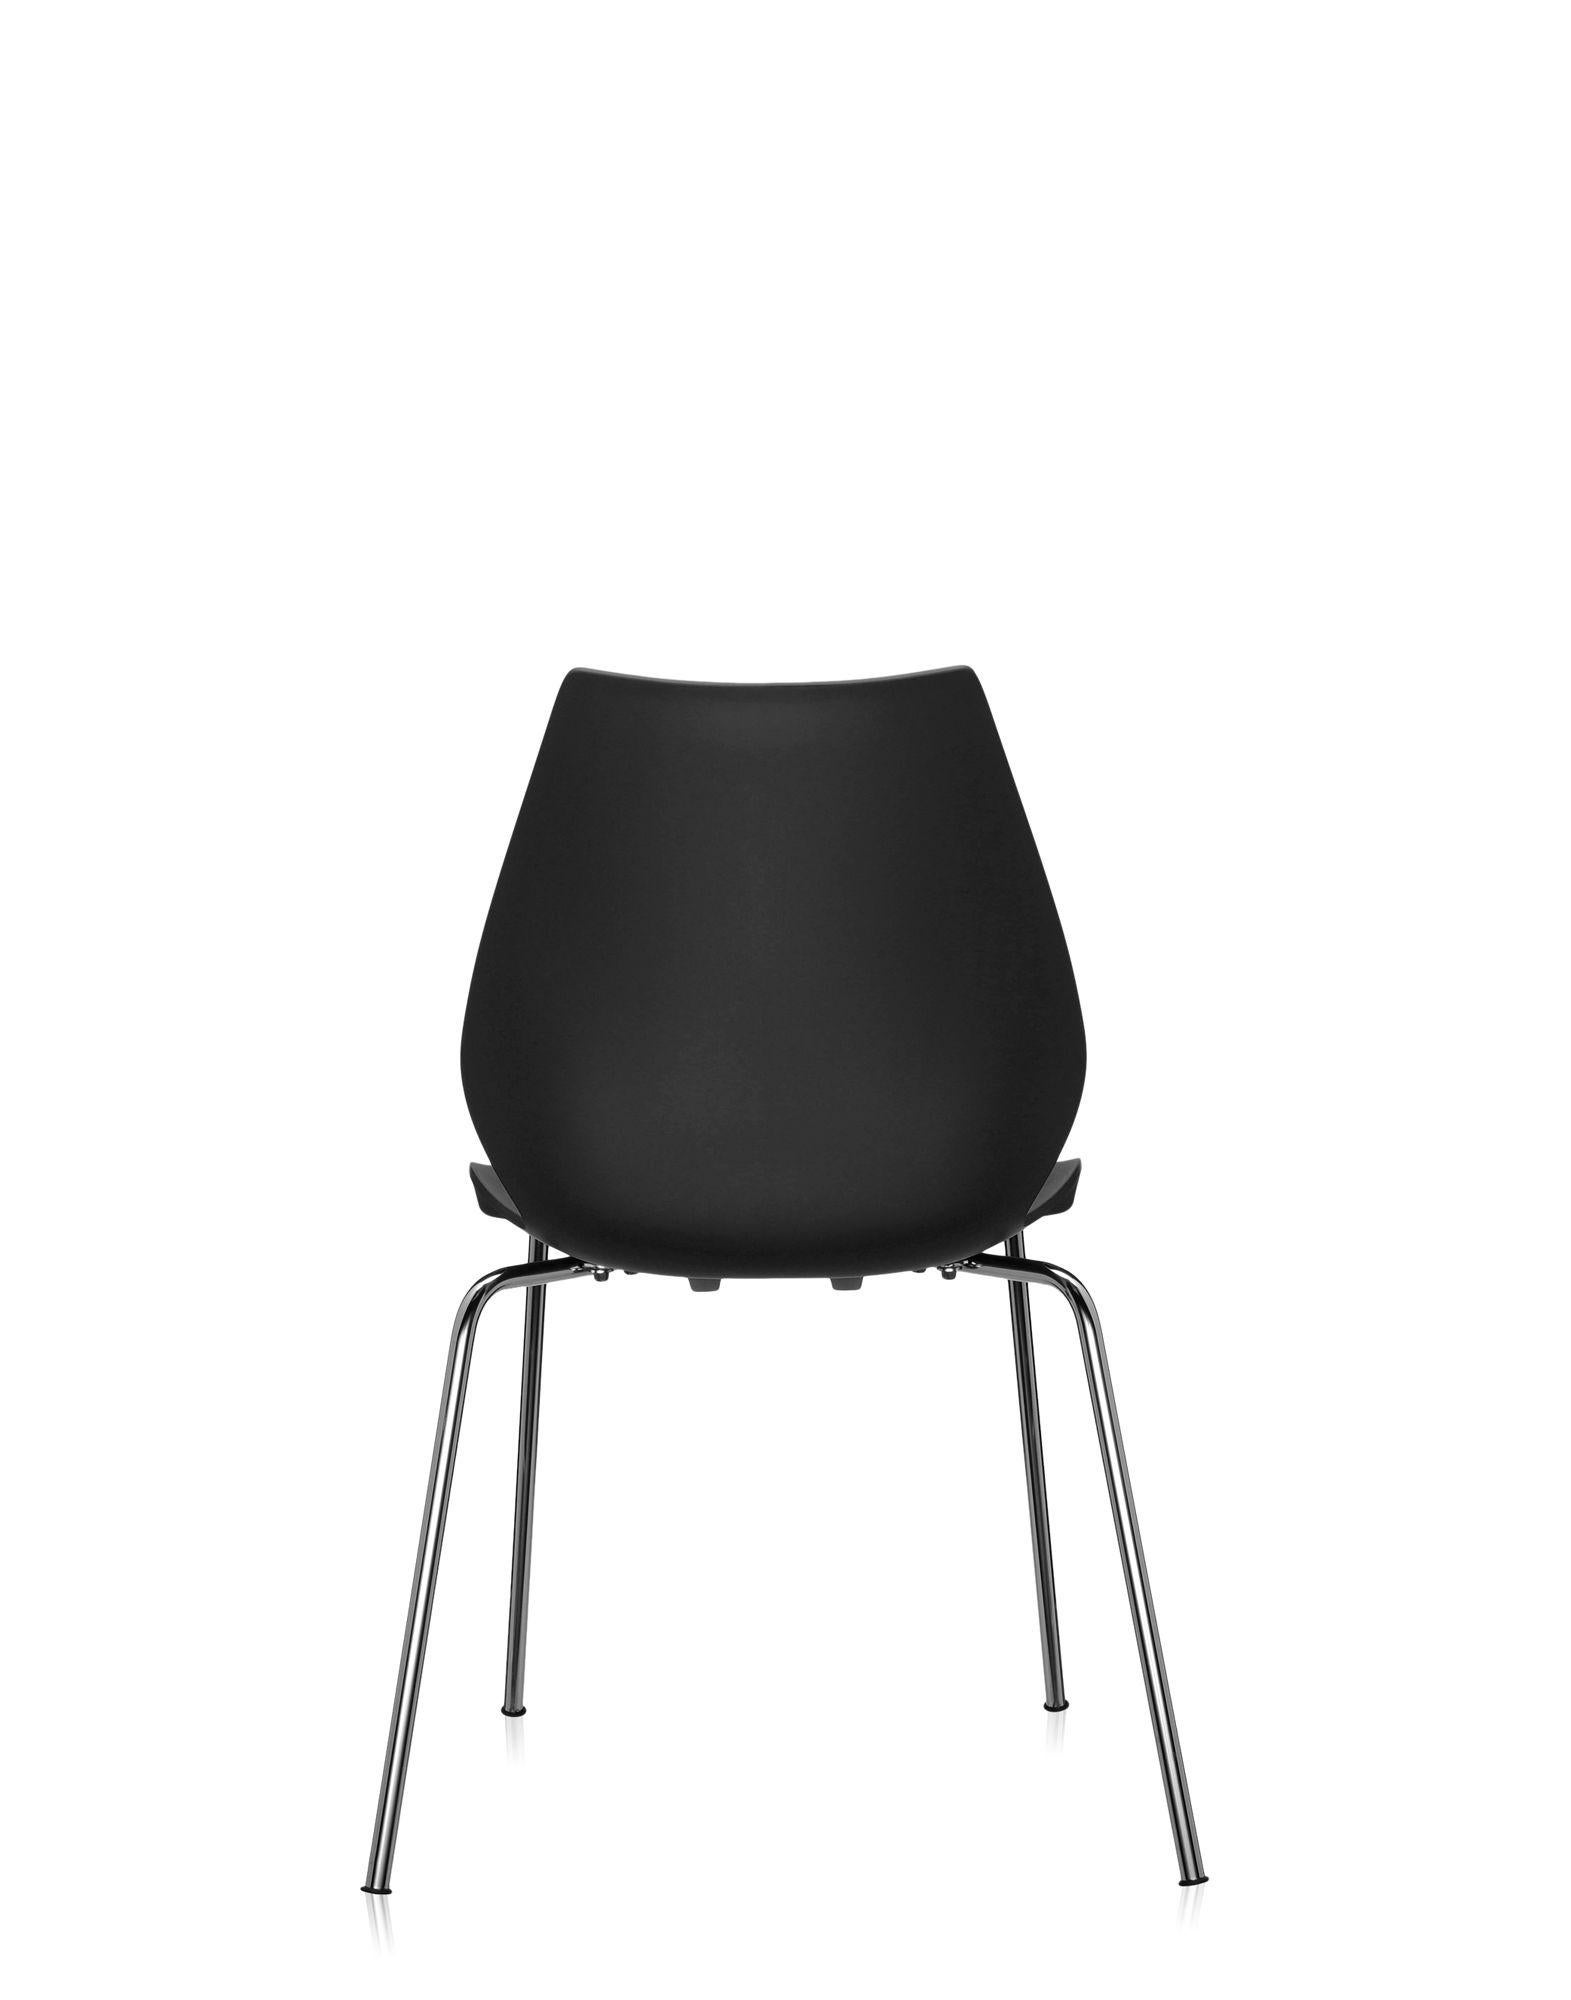 Steel Set of 2 Kartell Maui Armchair in Anthracite by Ludovica and Roberto Palomba